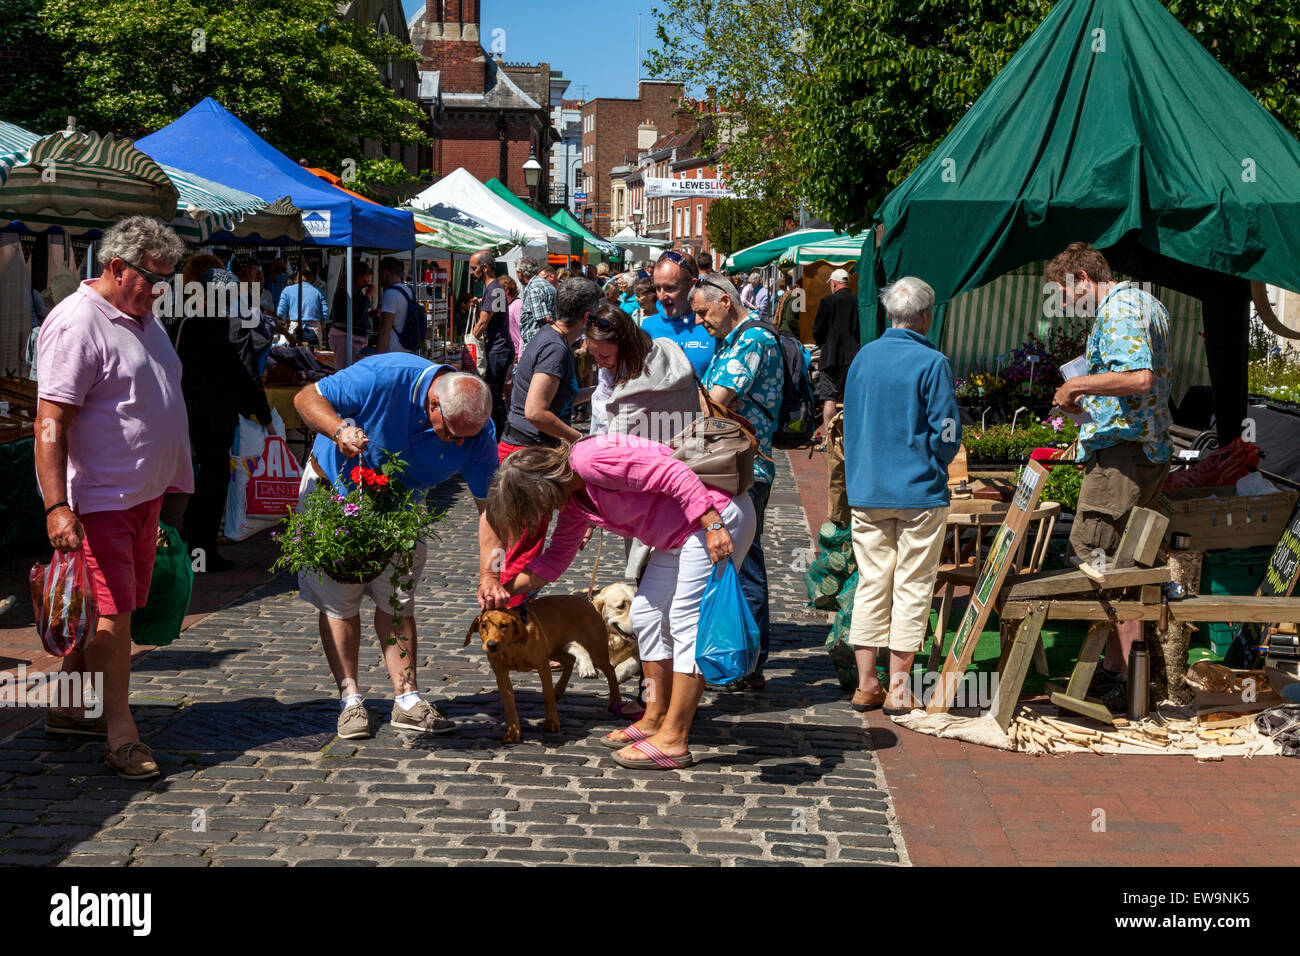 Lewes Farmer's Market, Lewes, Sussex, England Stock Photo